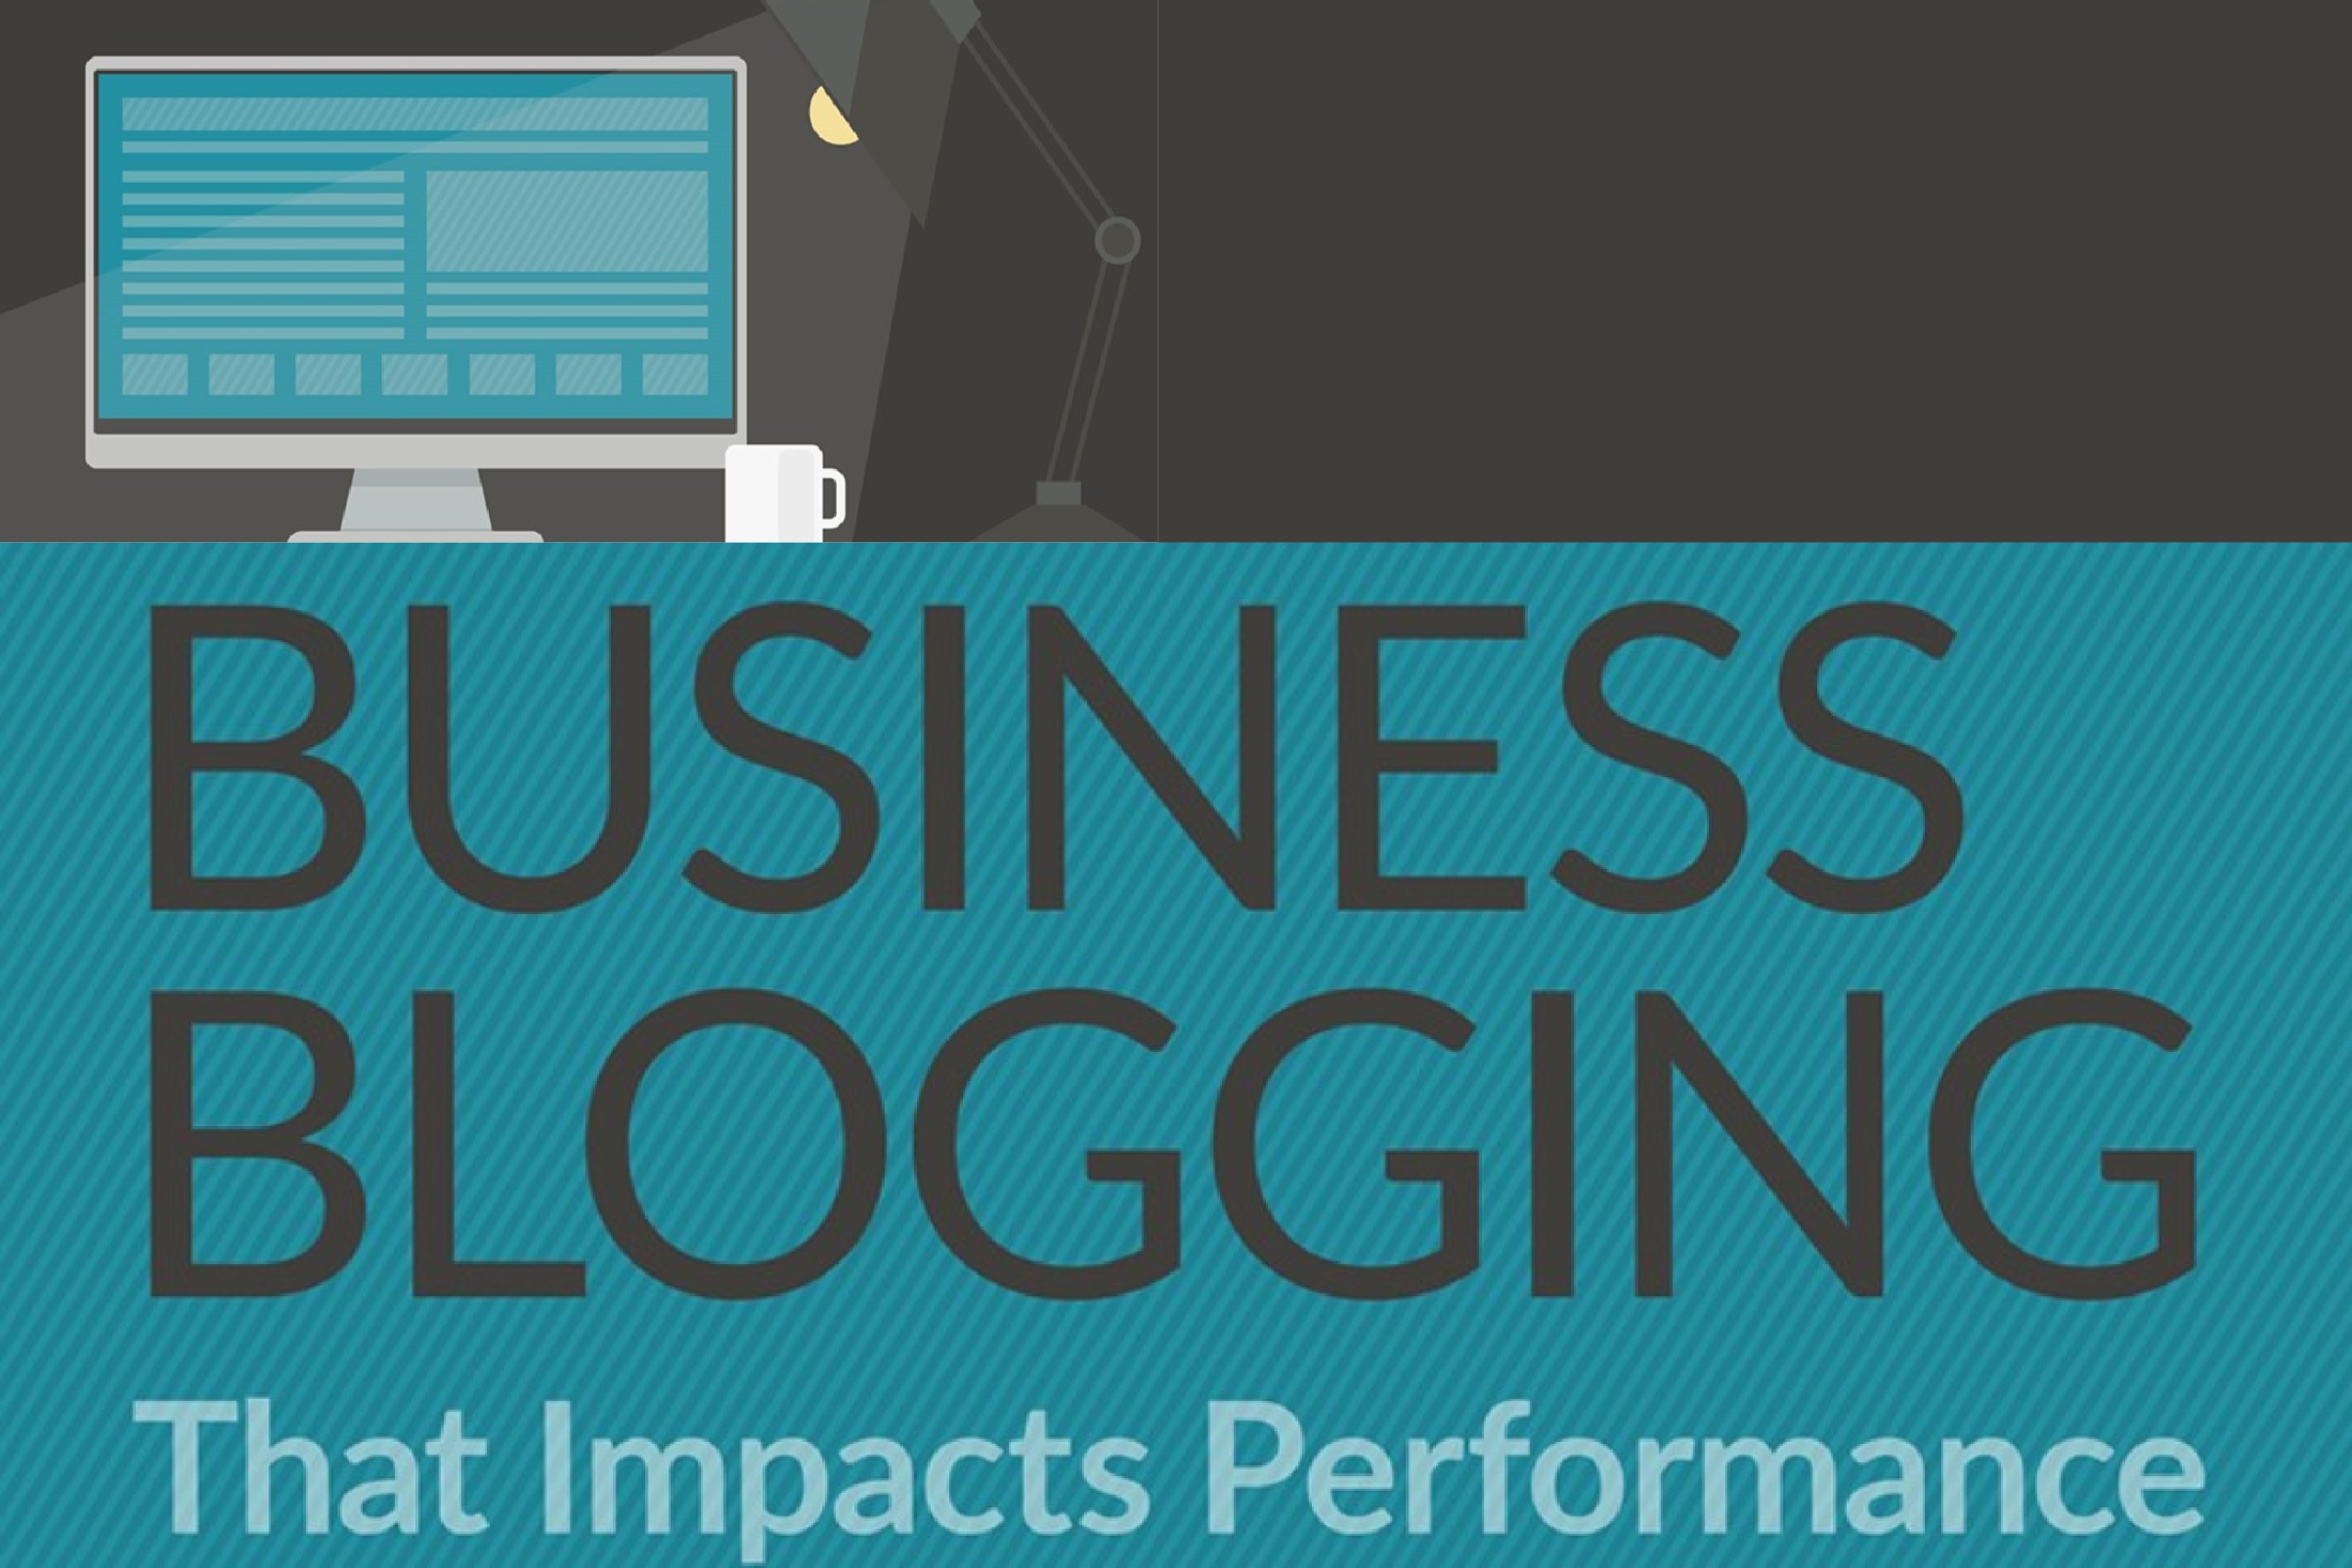 Business Blogging Benchmarks That Impact Traffic & Leads